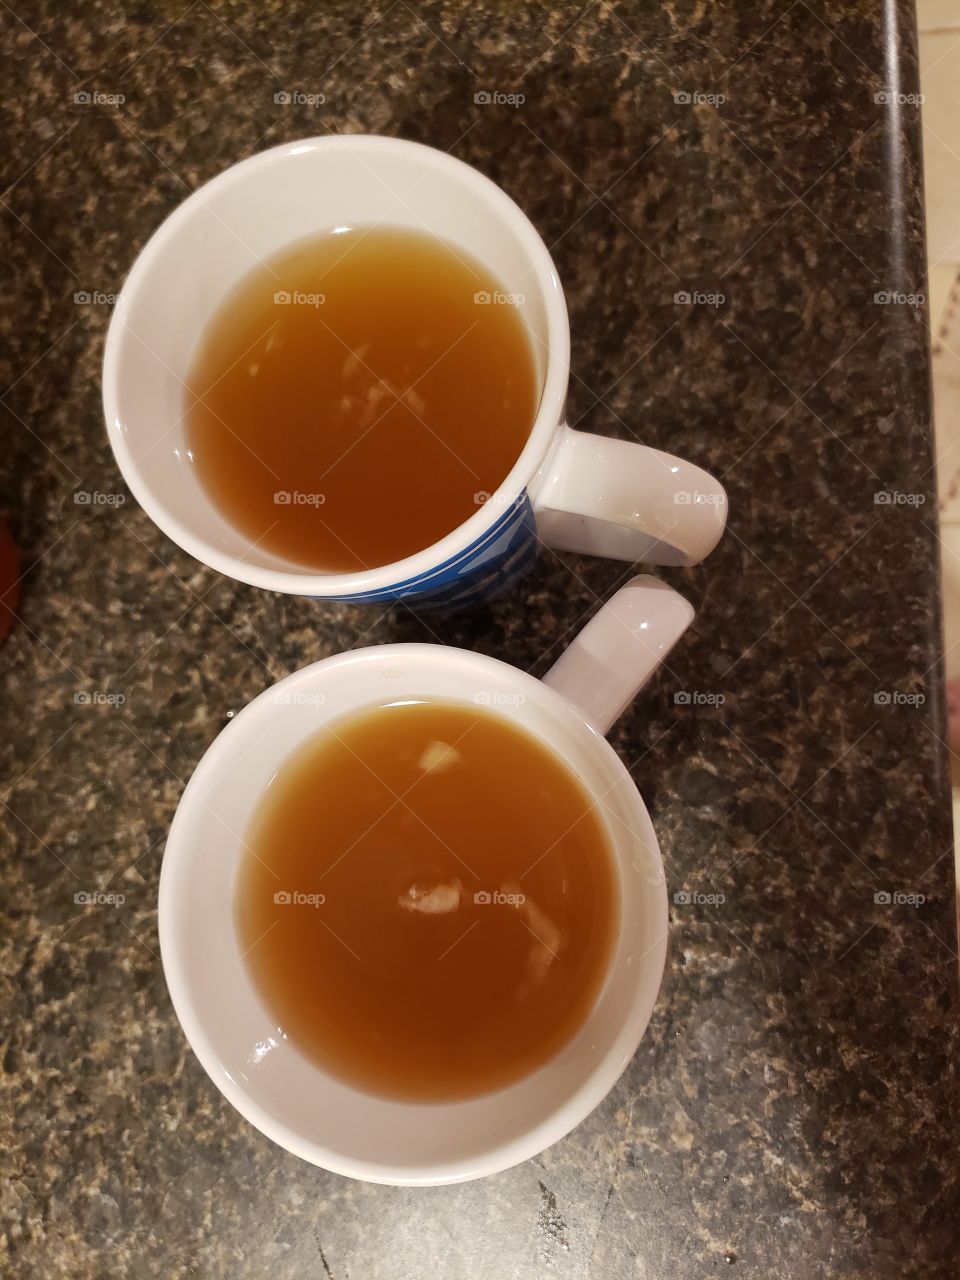 tea for two